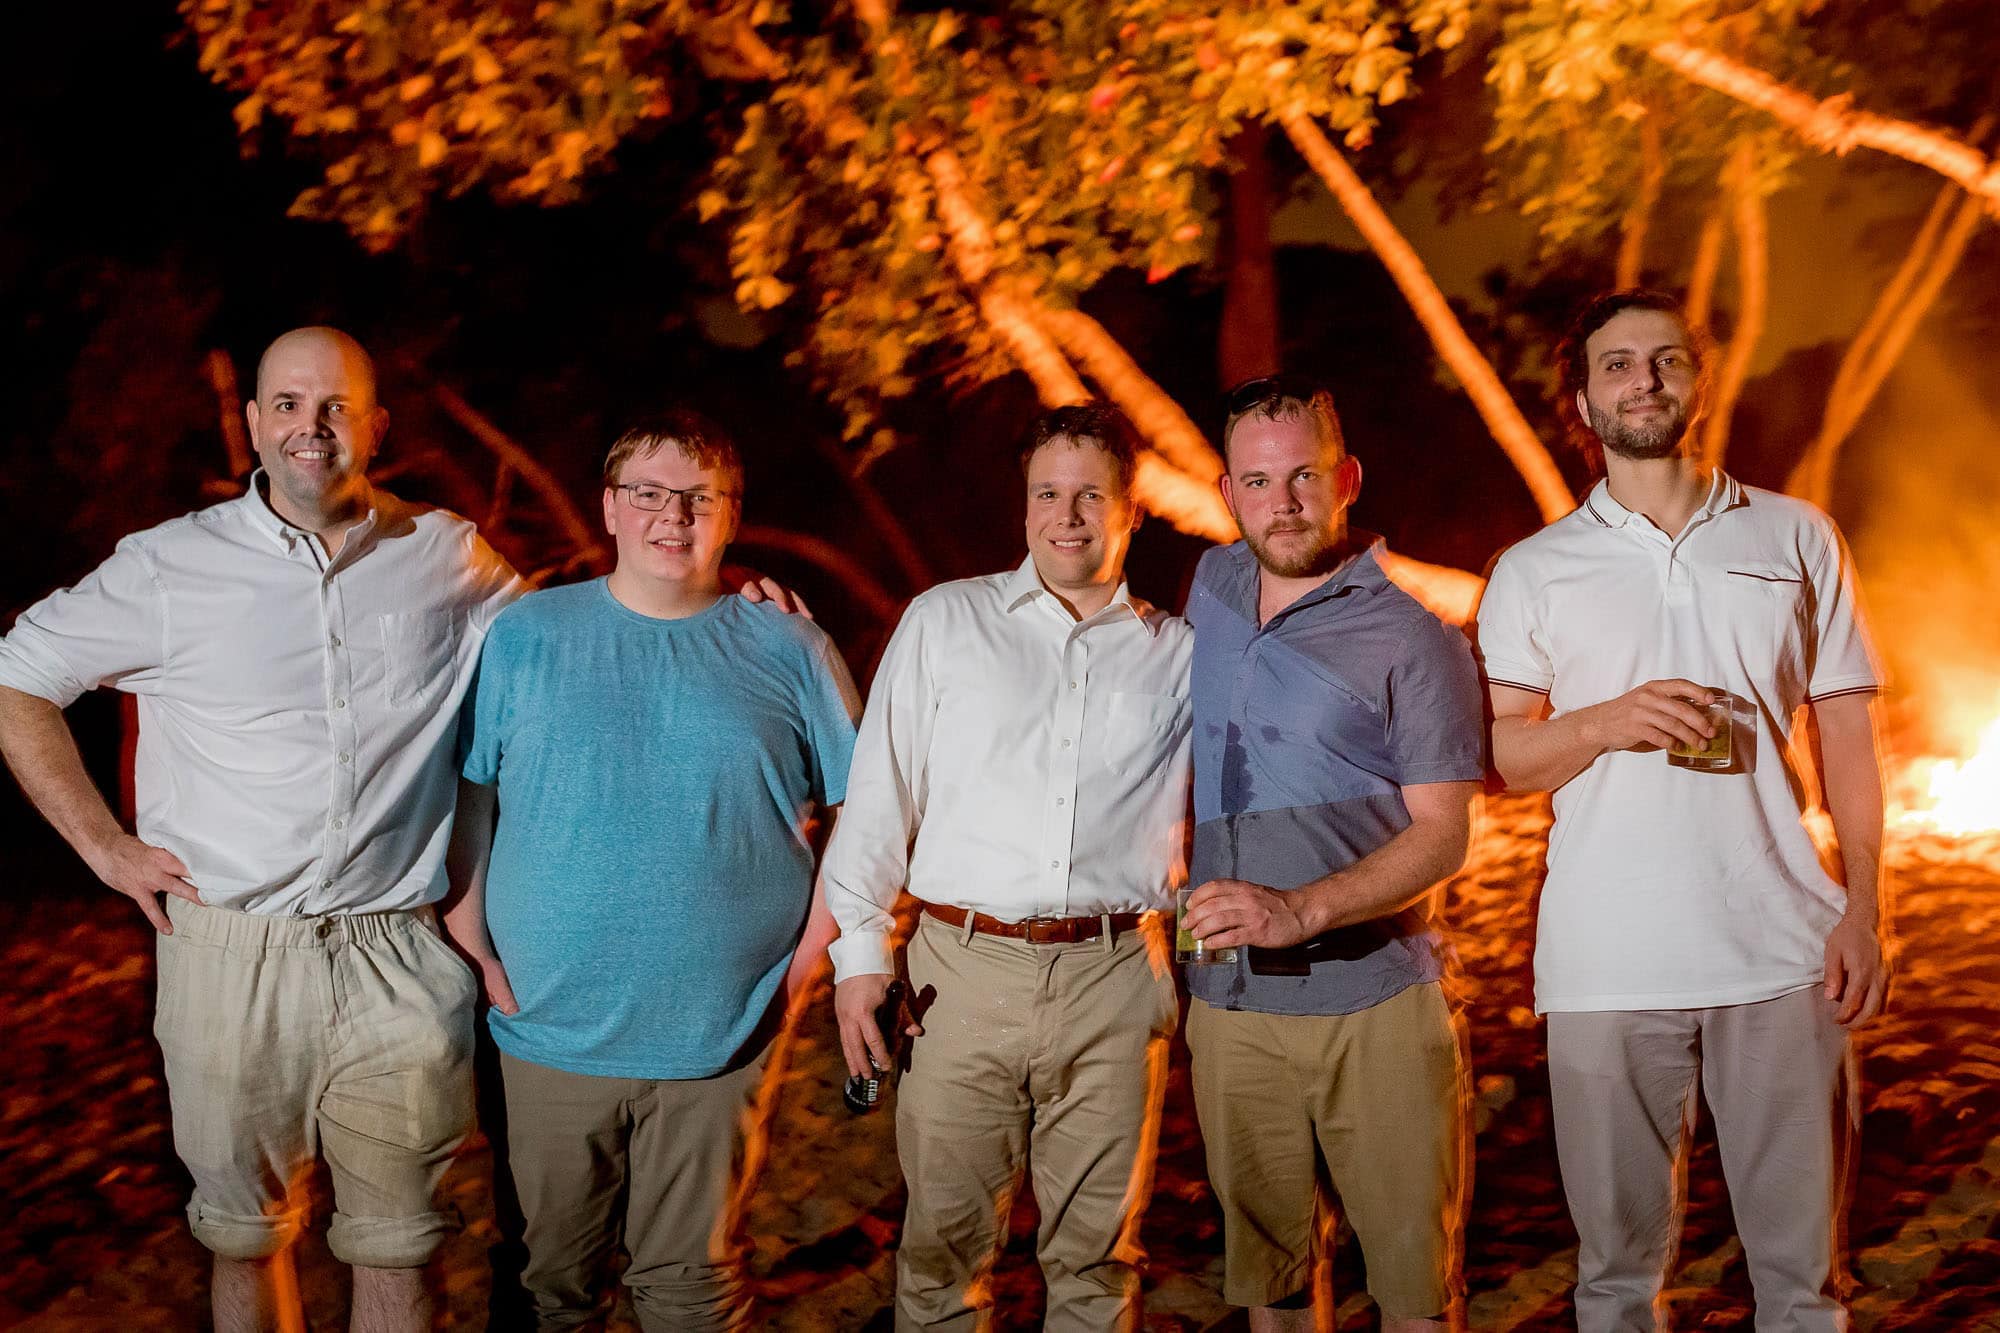 The groom with his buddies in front of the bonfire